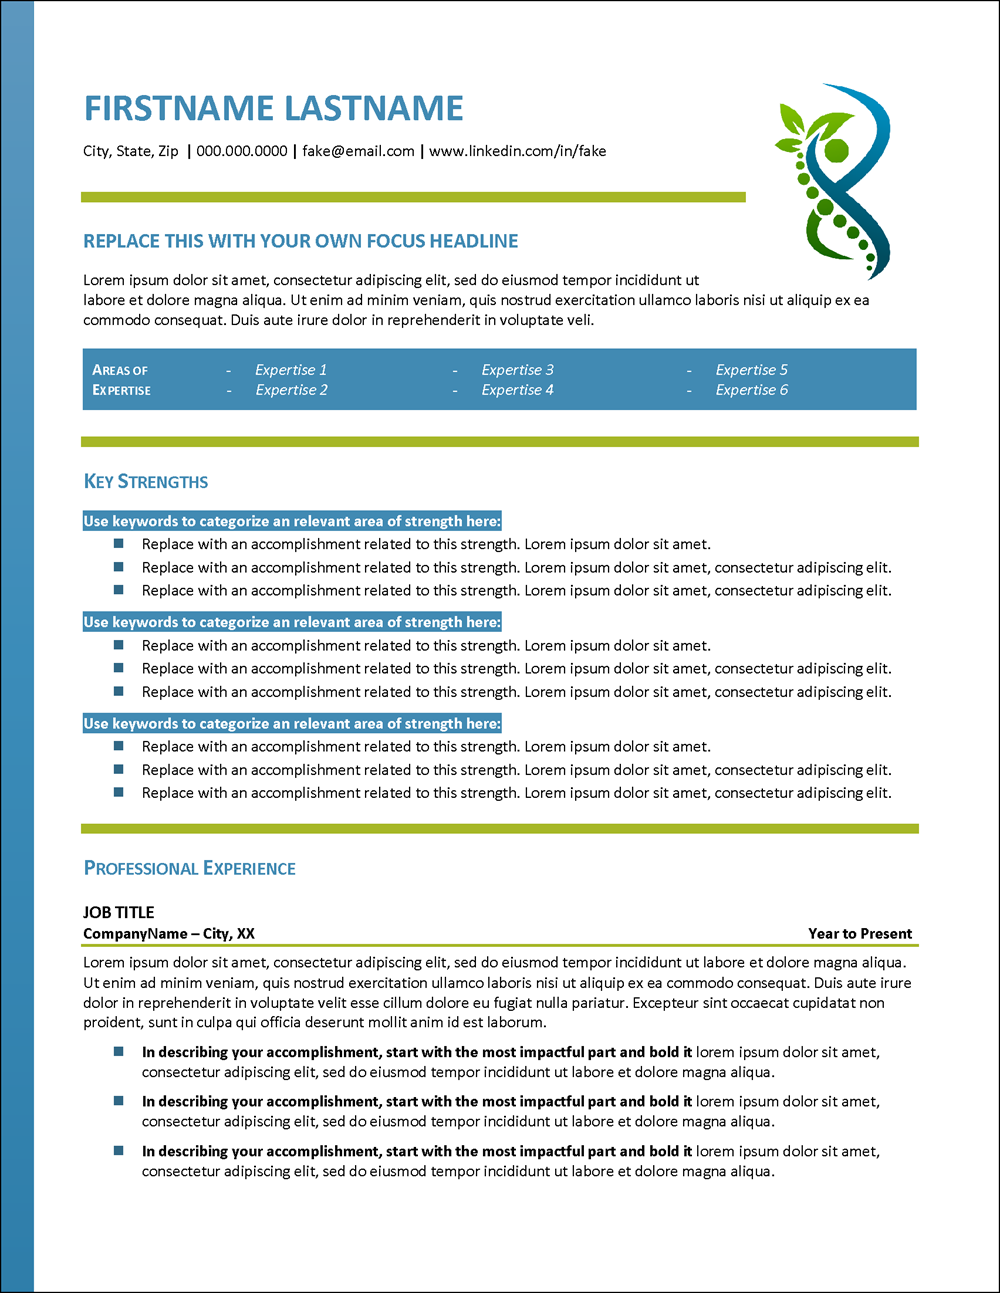 Example Resume Template for Nurses & Healthcare Providers